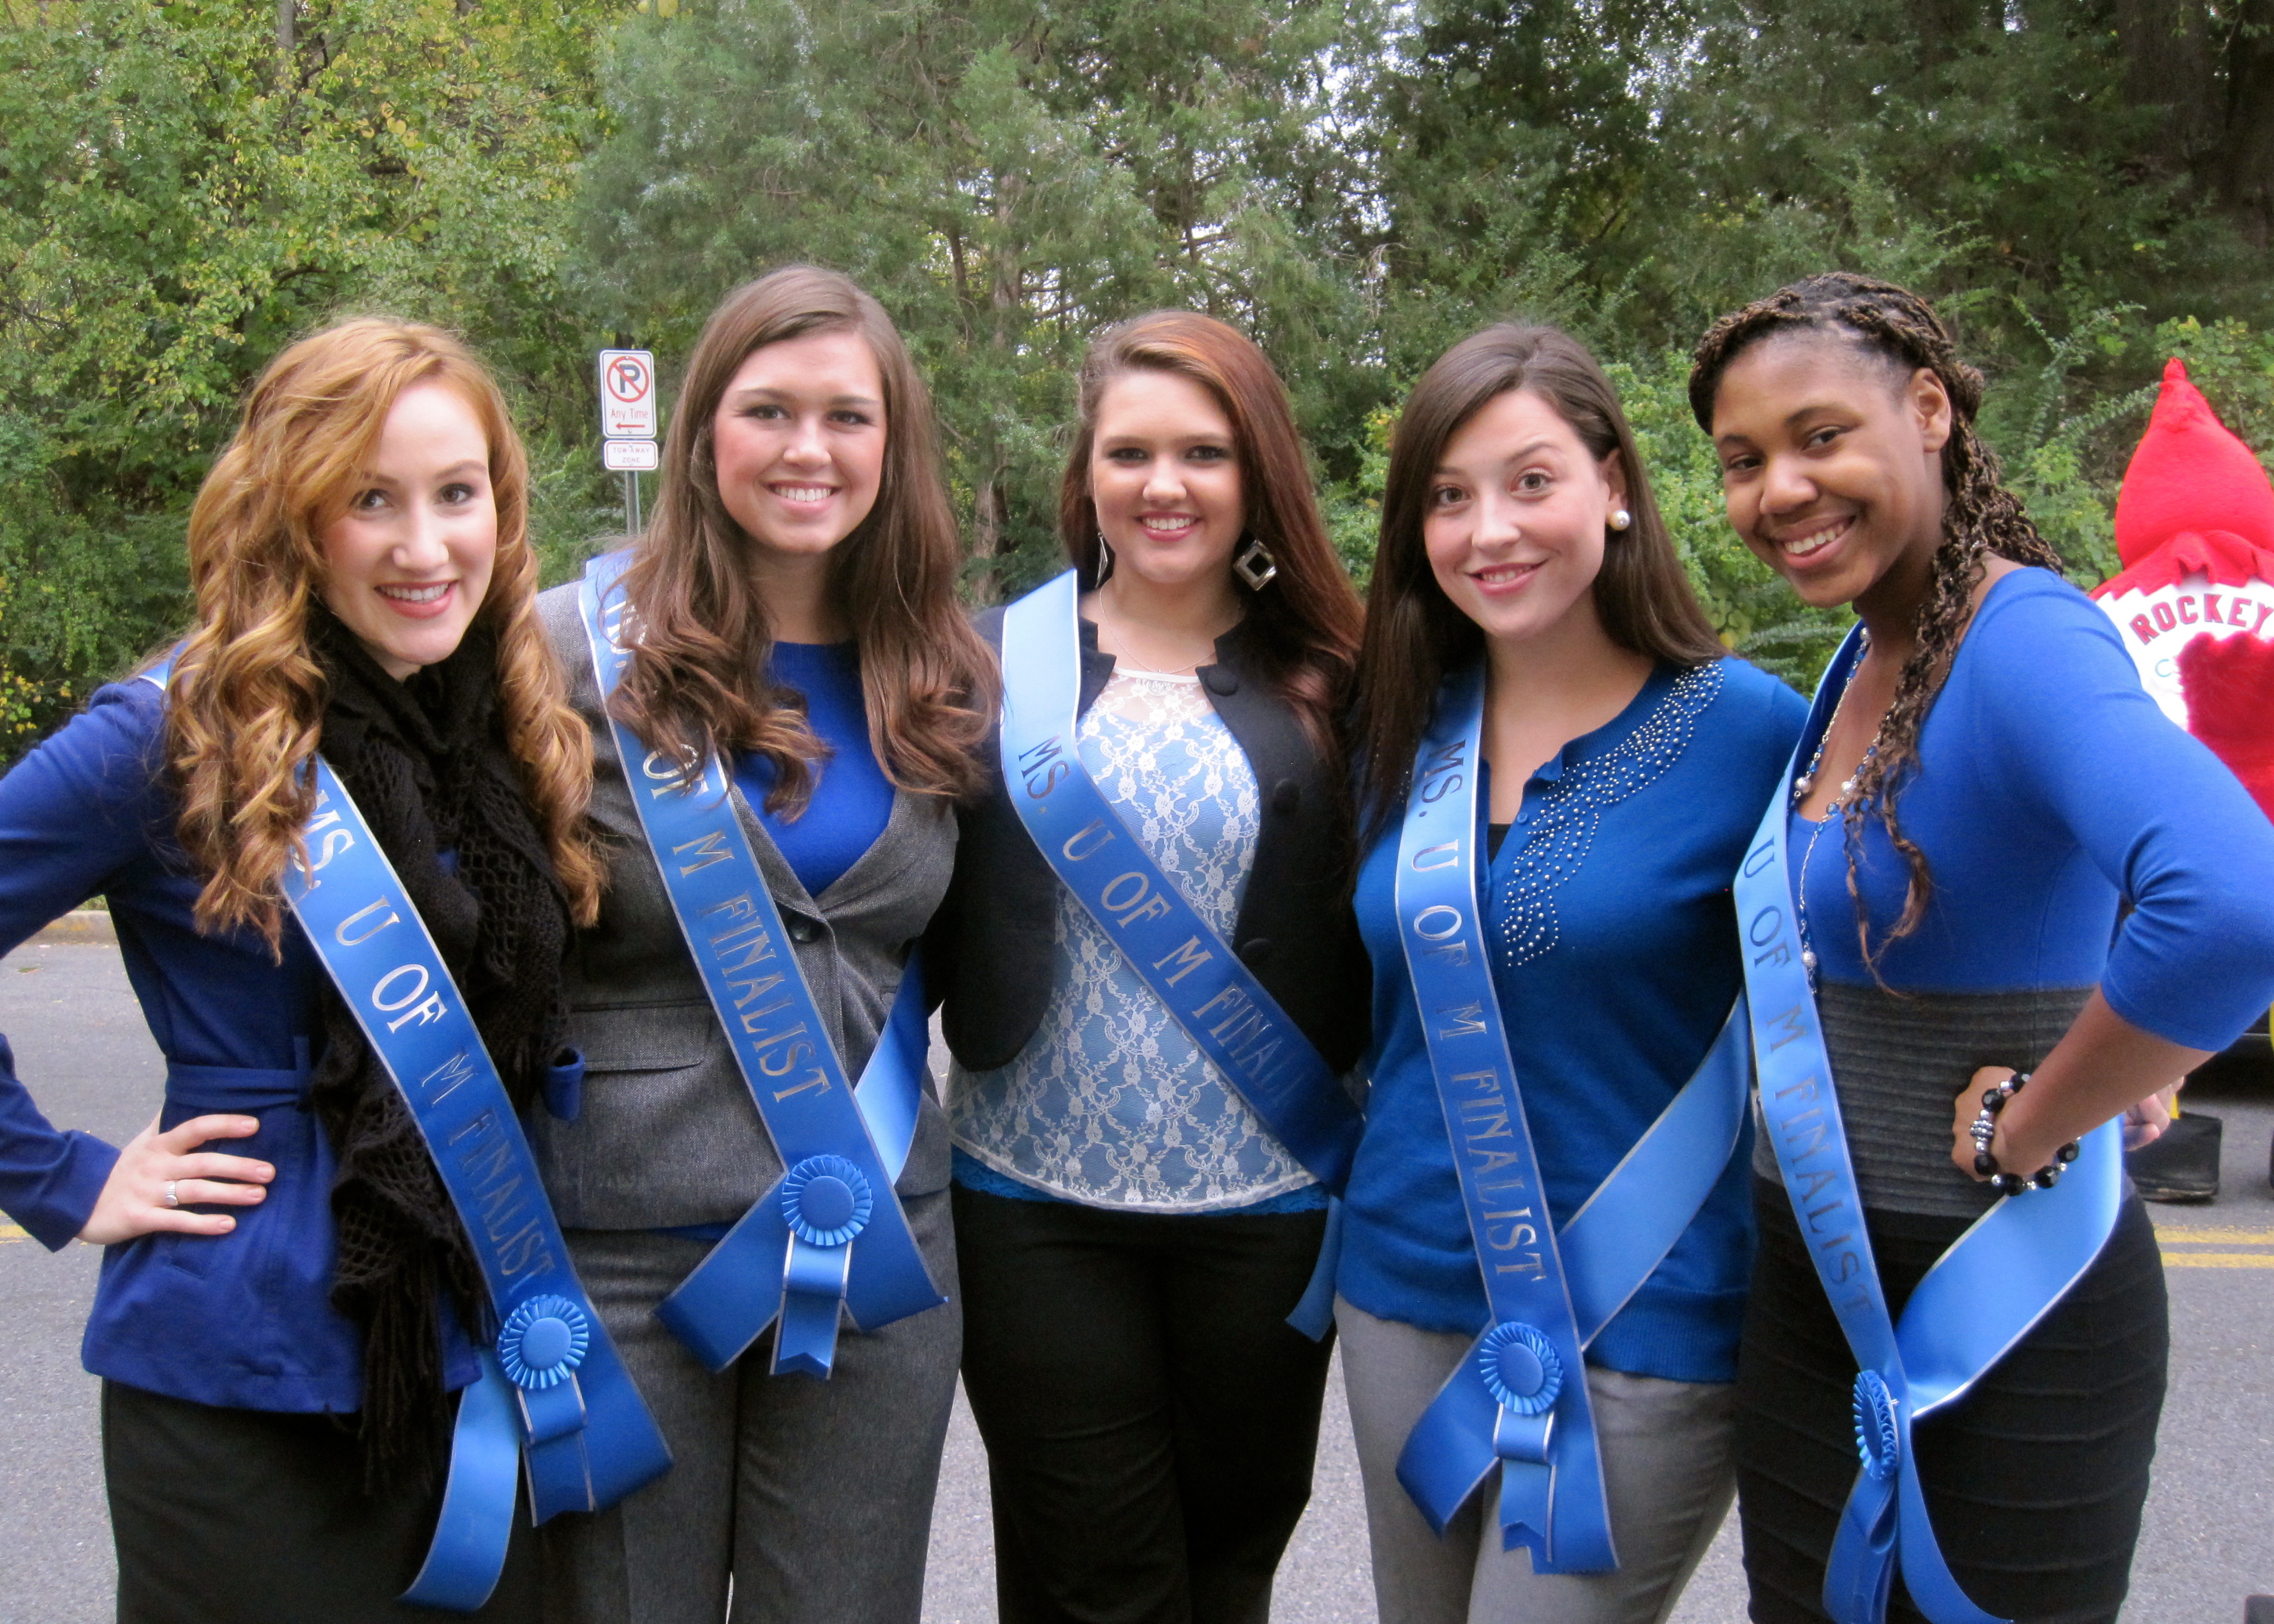 Katelyn was selected as 1 of 5 finalists for Ms. University of Memphis.